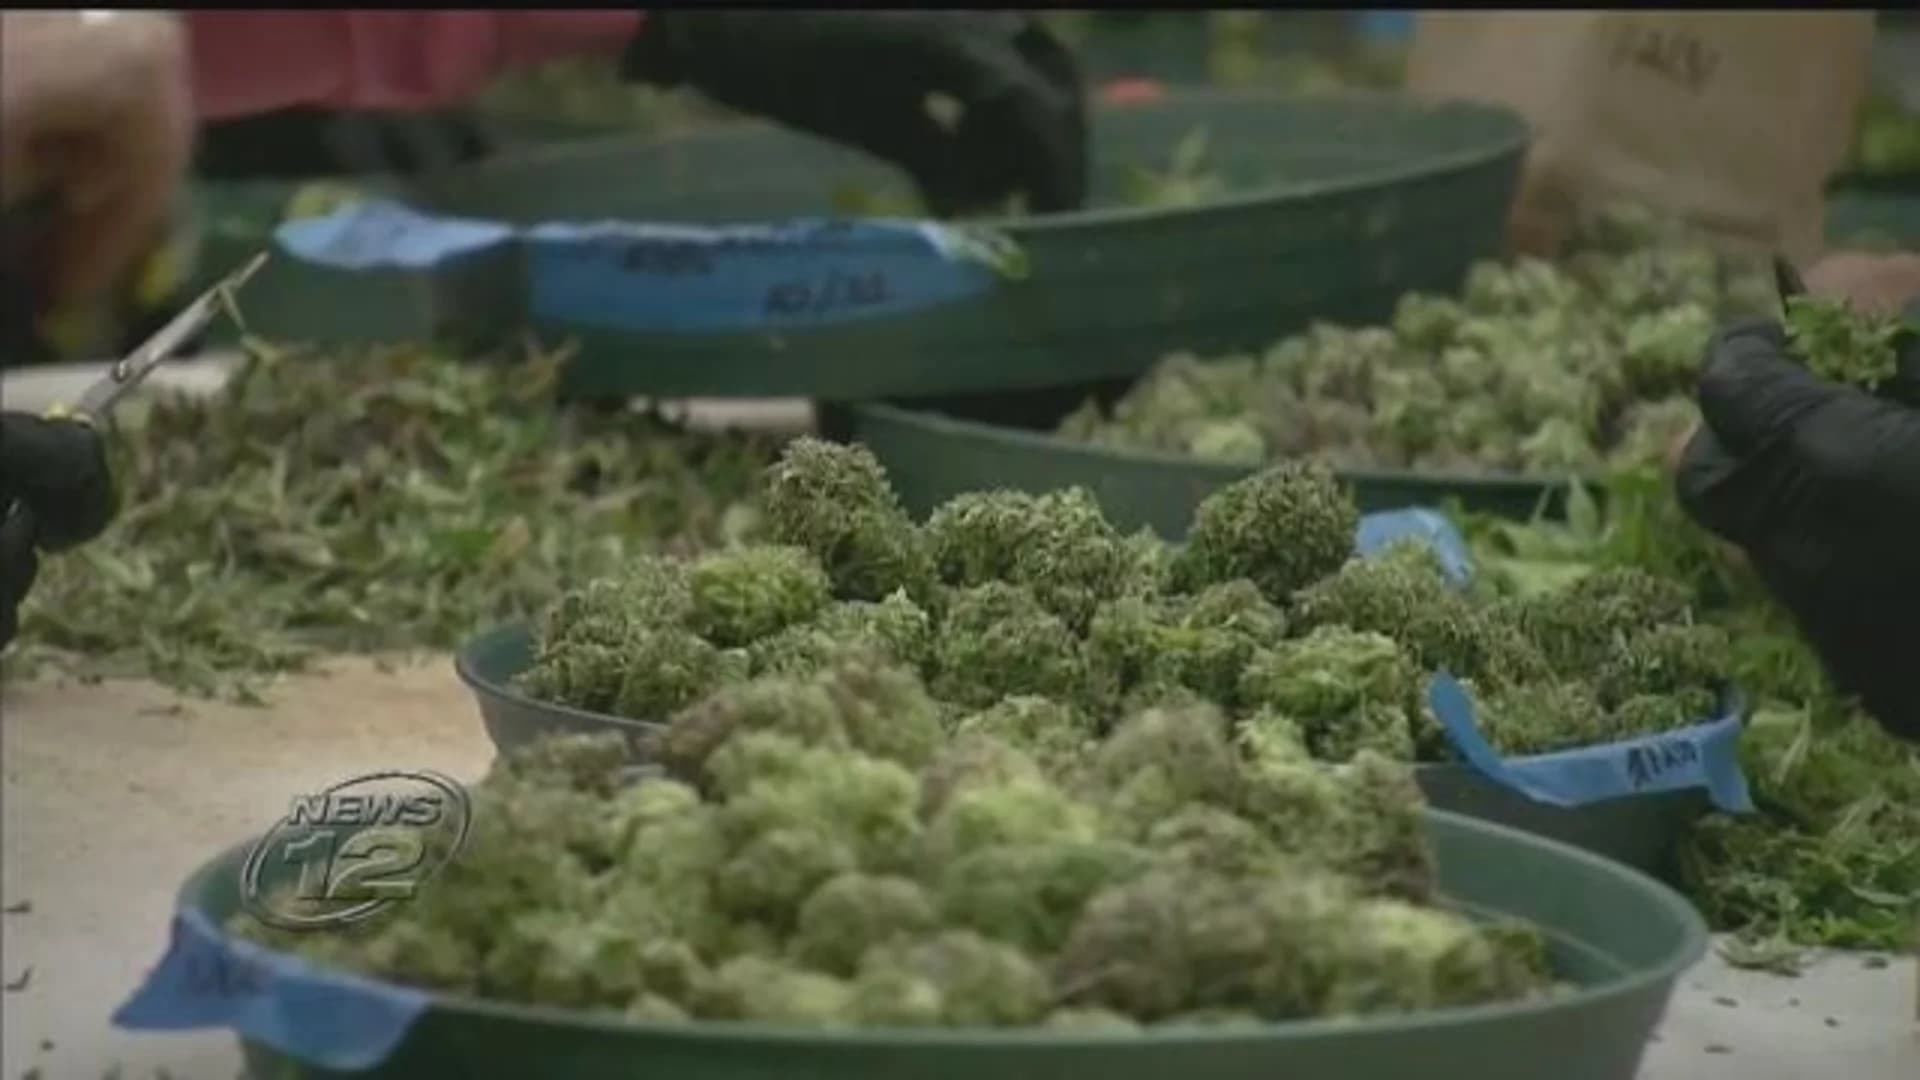 Suffolk considering opt-out option for pot if it becomes legal in NY